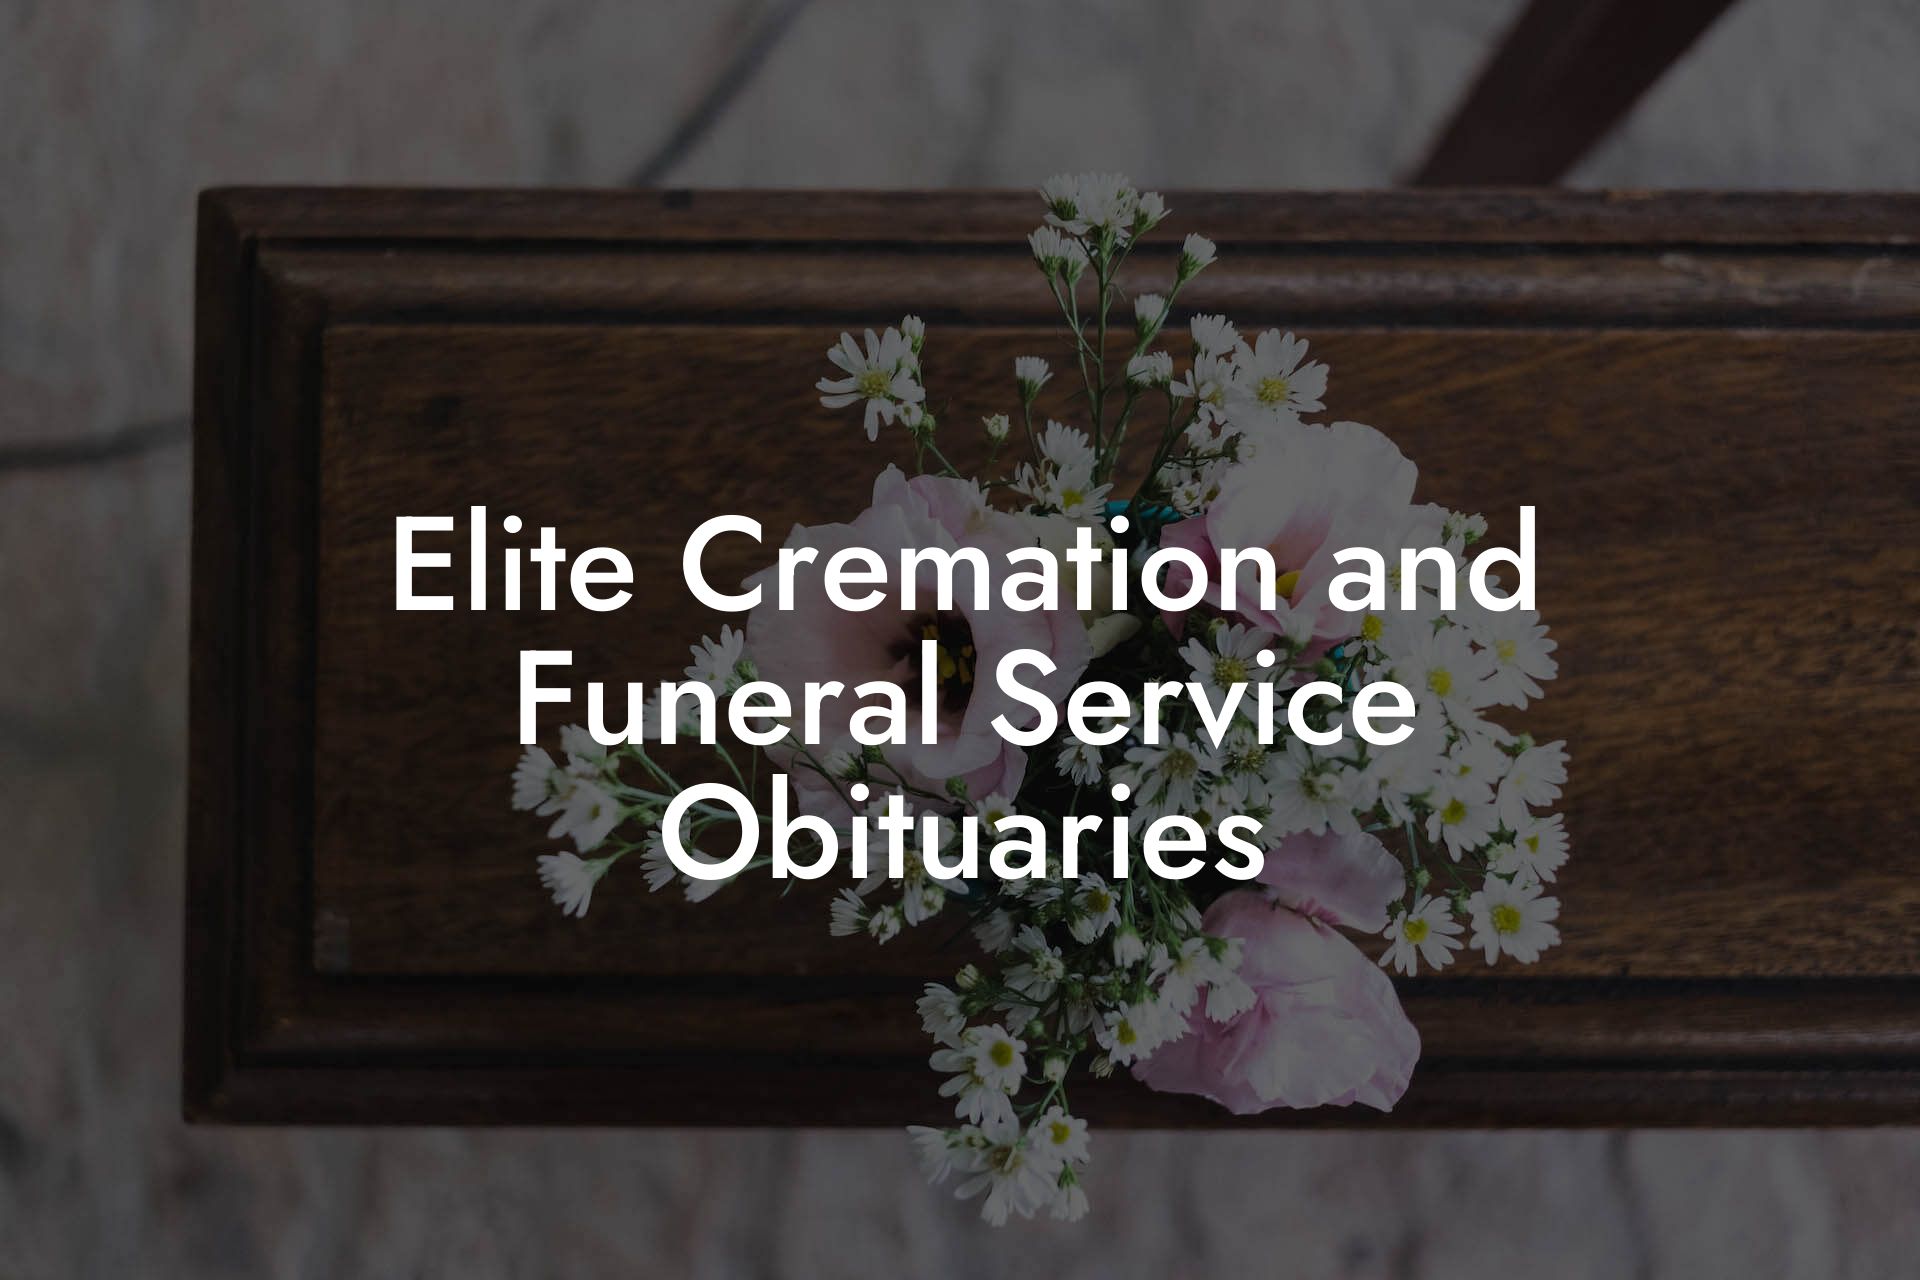 Elite Cremation and Funeral Service Obituaries